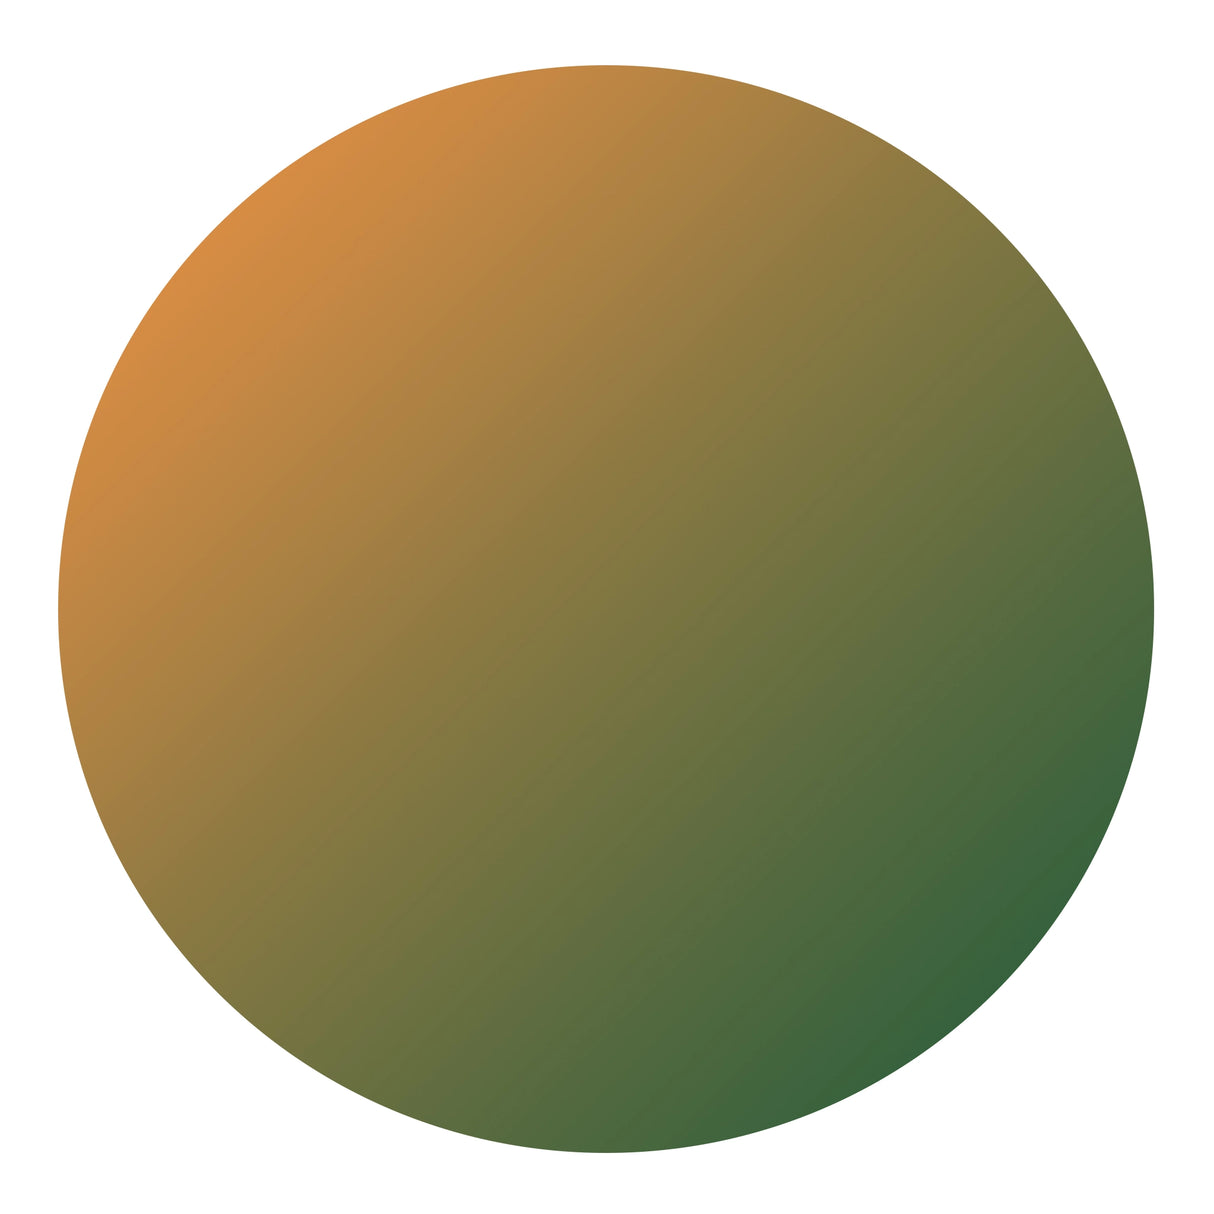 permanent vinyl cold color change pv yellow to deep green